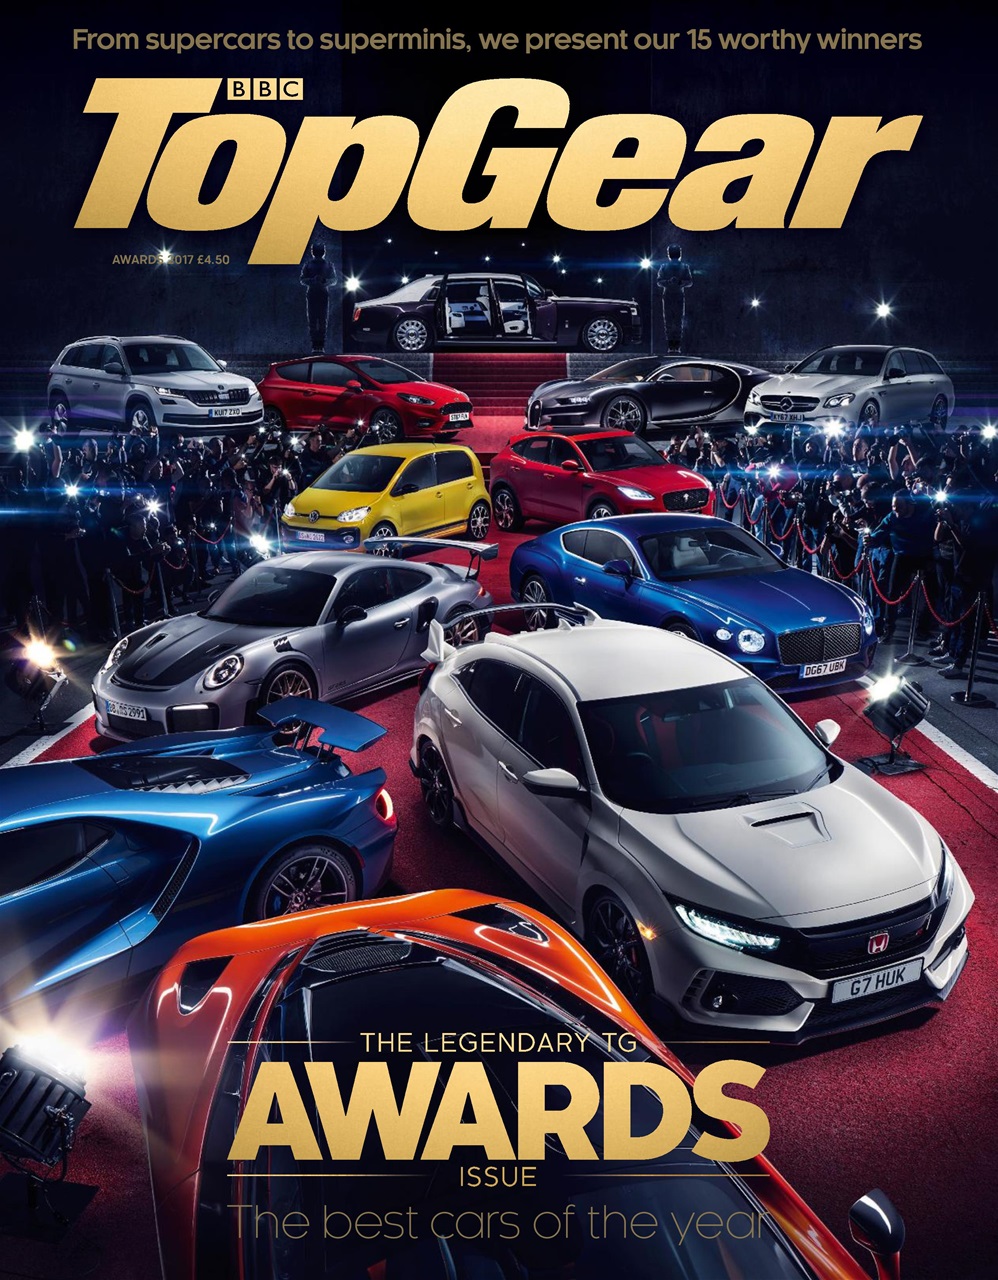 BBC Top Gear Magazine Awards 2017 Back Issue